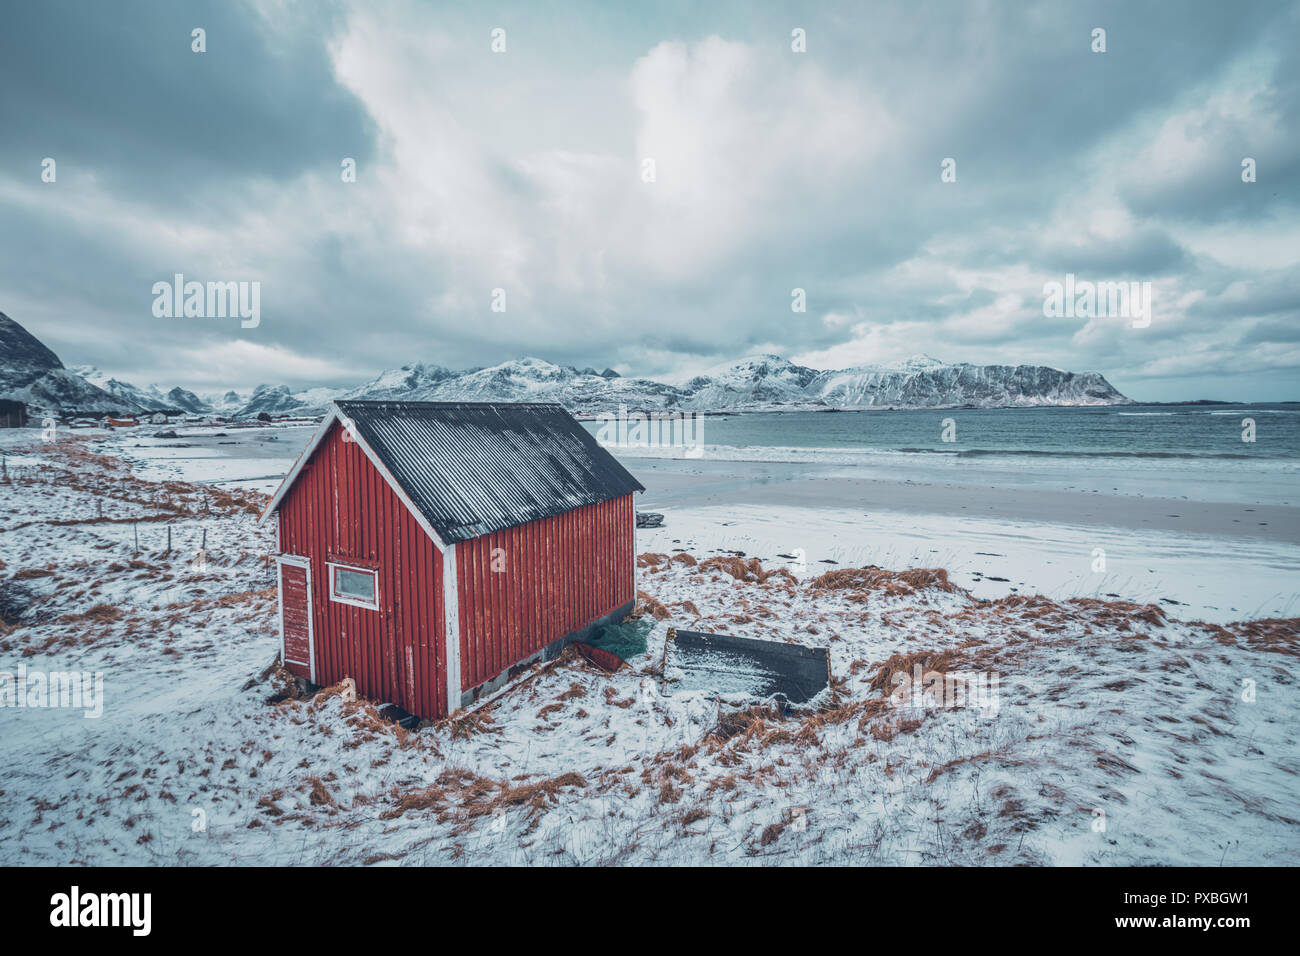 Red rorbu house shed on beach of fjord, Norway Stock Photo